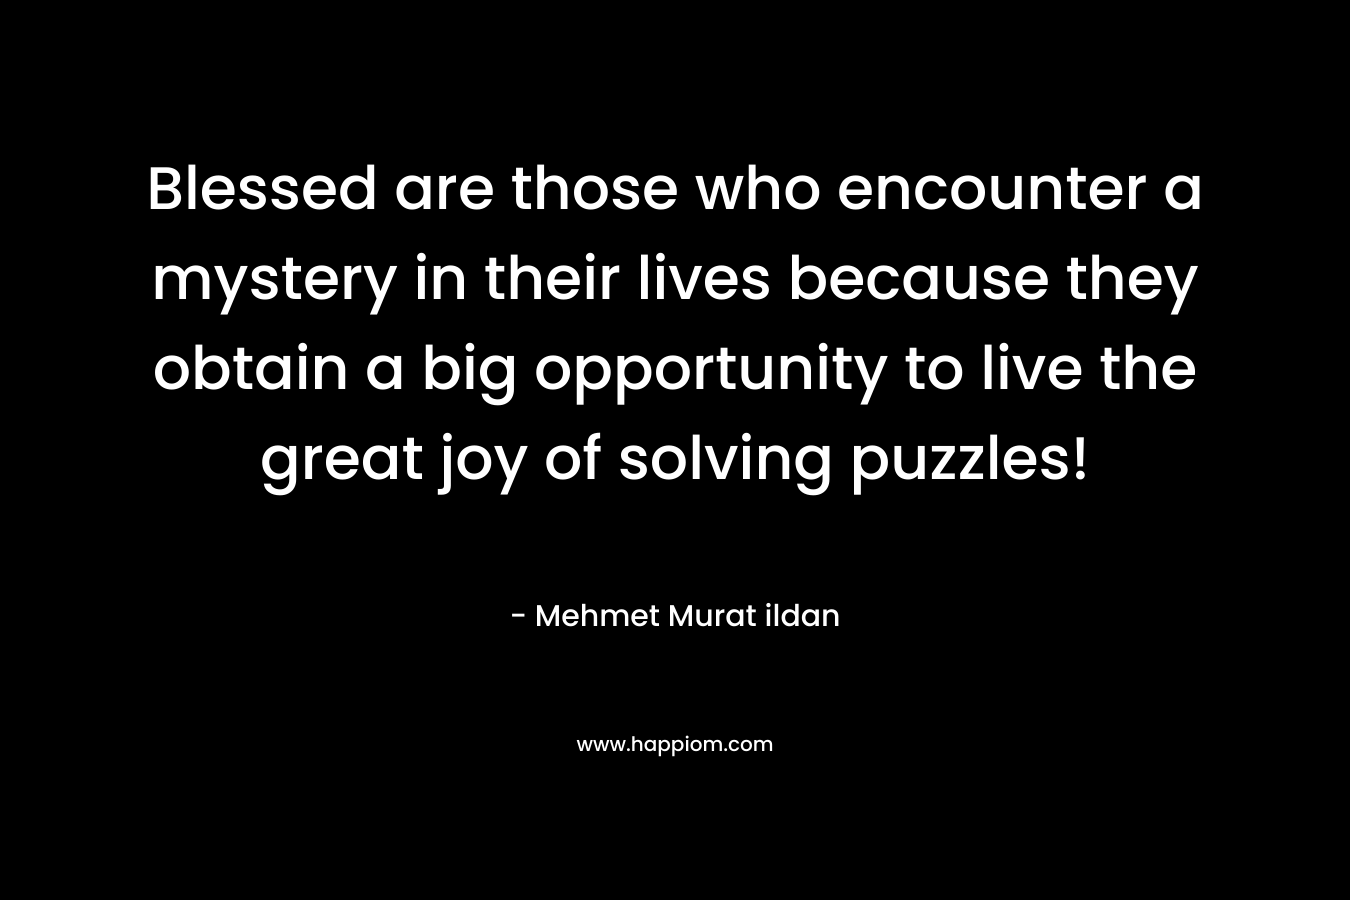 Blessed are those who encounter a mystery in their lives because they obtain a big opportunity to live the great joy of solving puzzles!